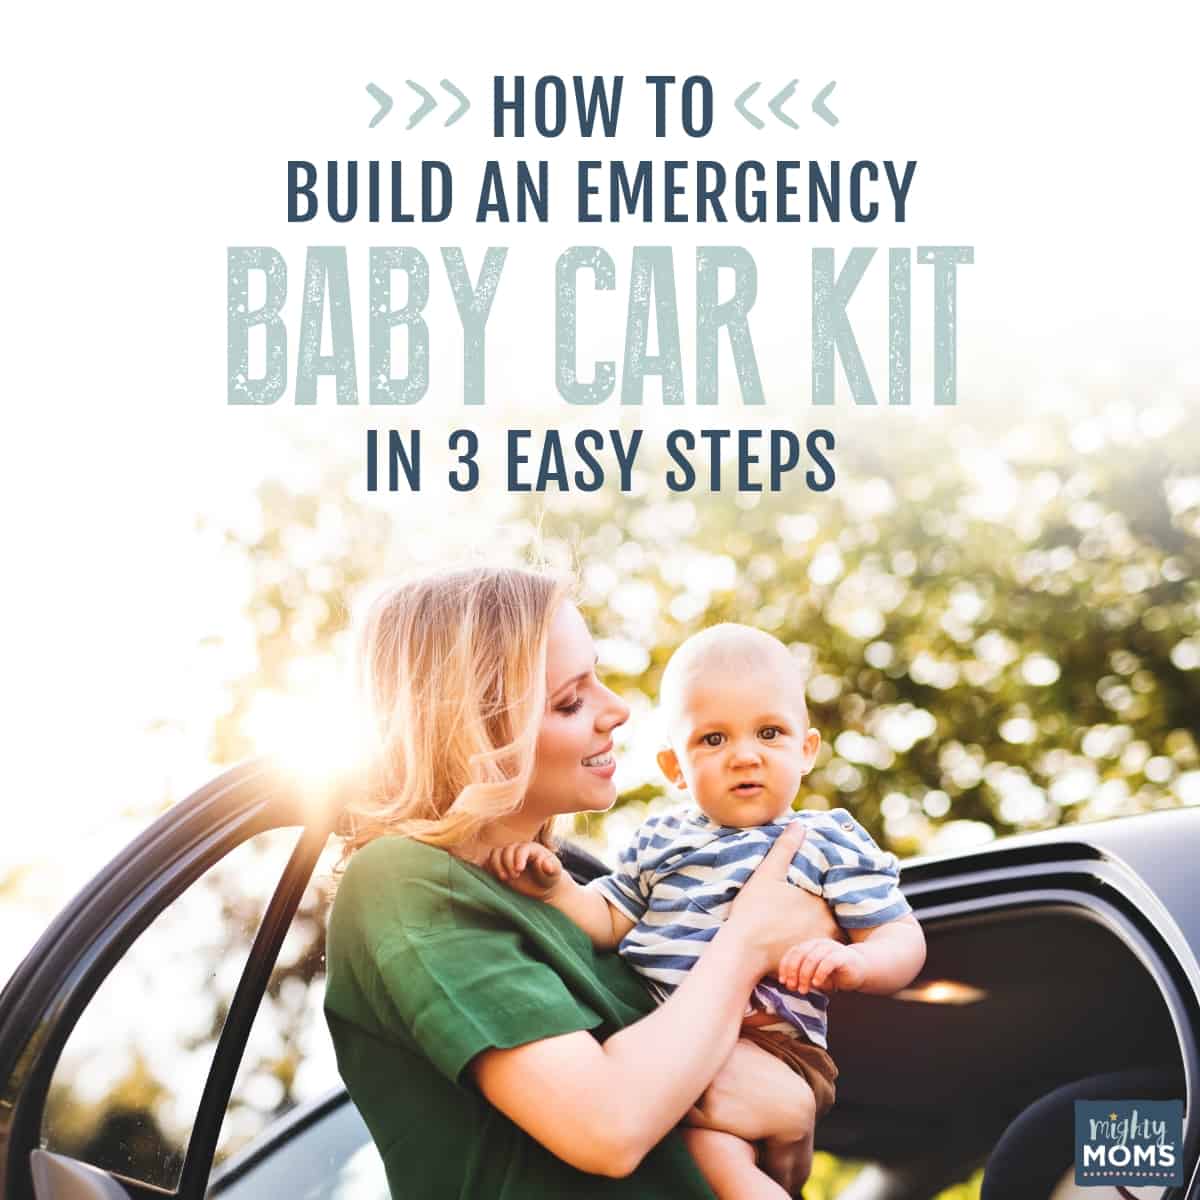 Build Your Emergency Baby Car Kit in 3 Easy Steps - MightyMoms.club